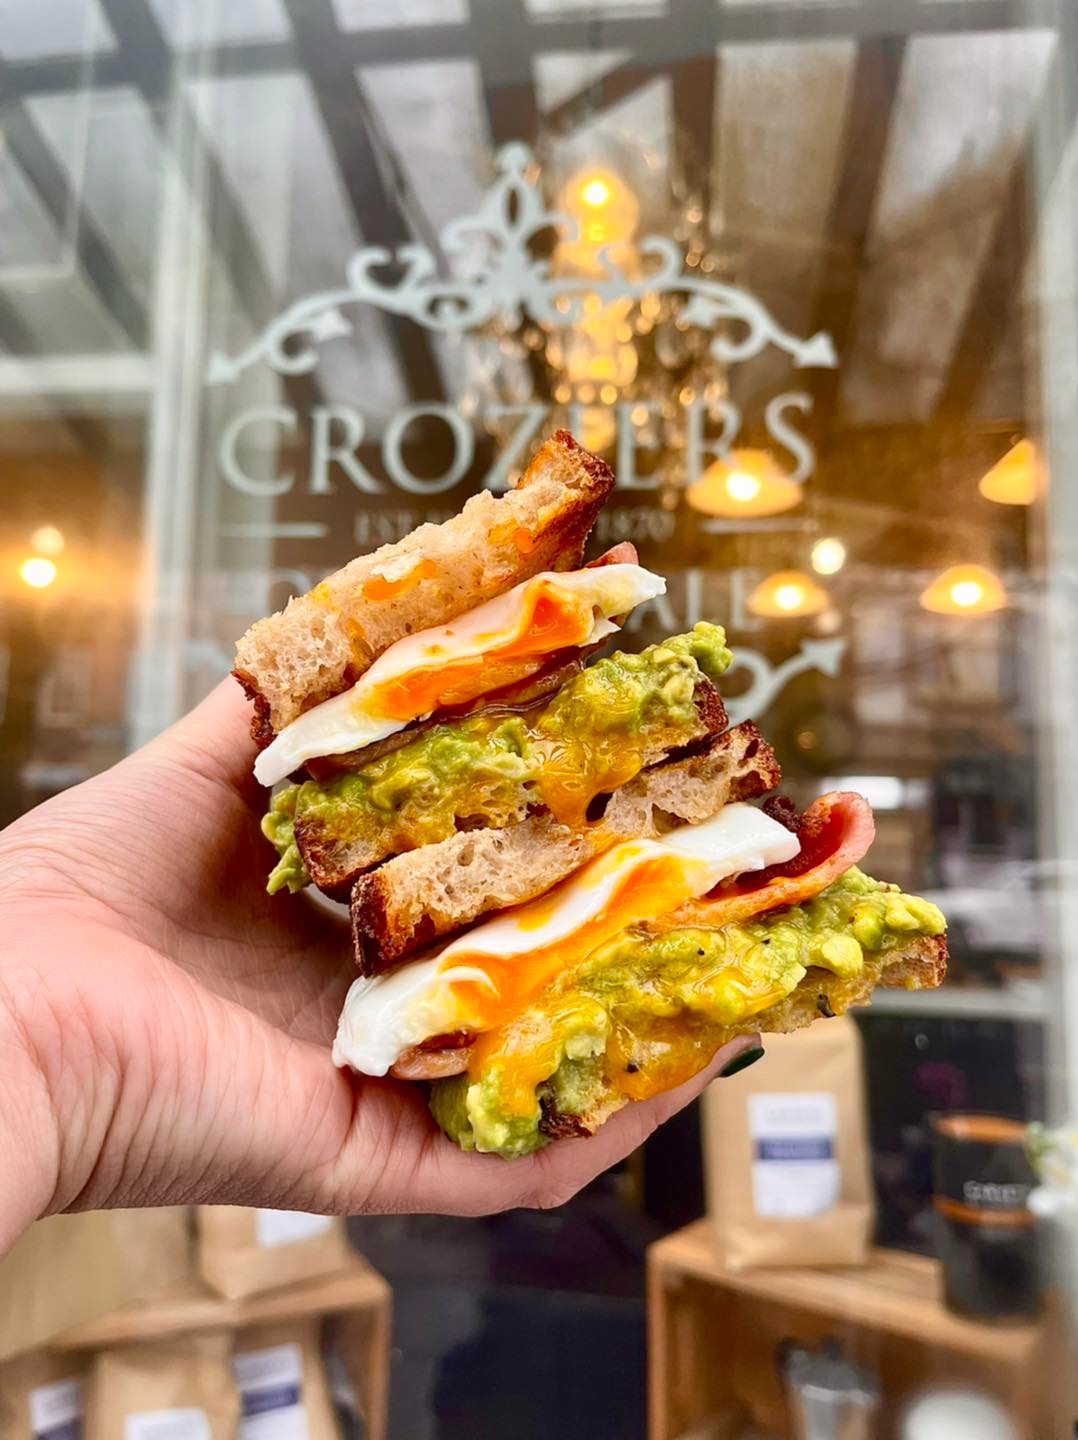 The famous Croziers sandwich and coffee shop in Southport has revealed plans to expand